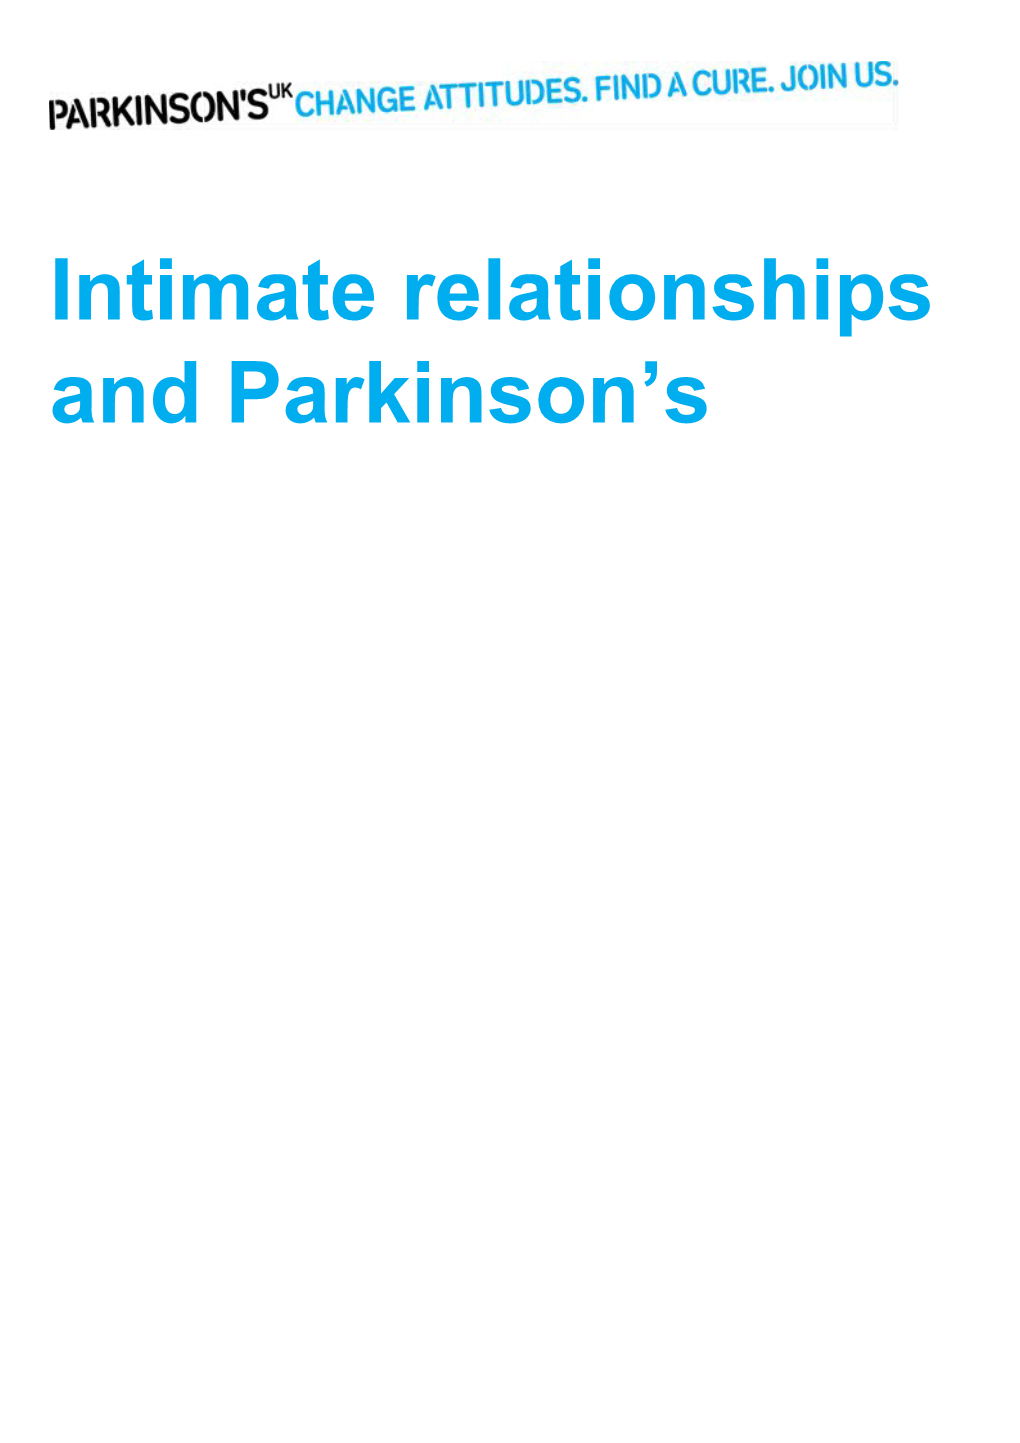 Intimate Relationships and Parkinson's Booklet (Word, 242KB)